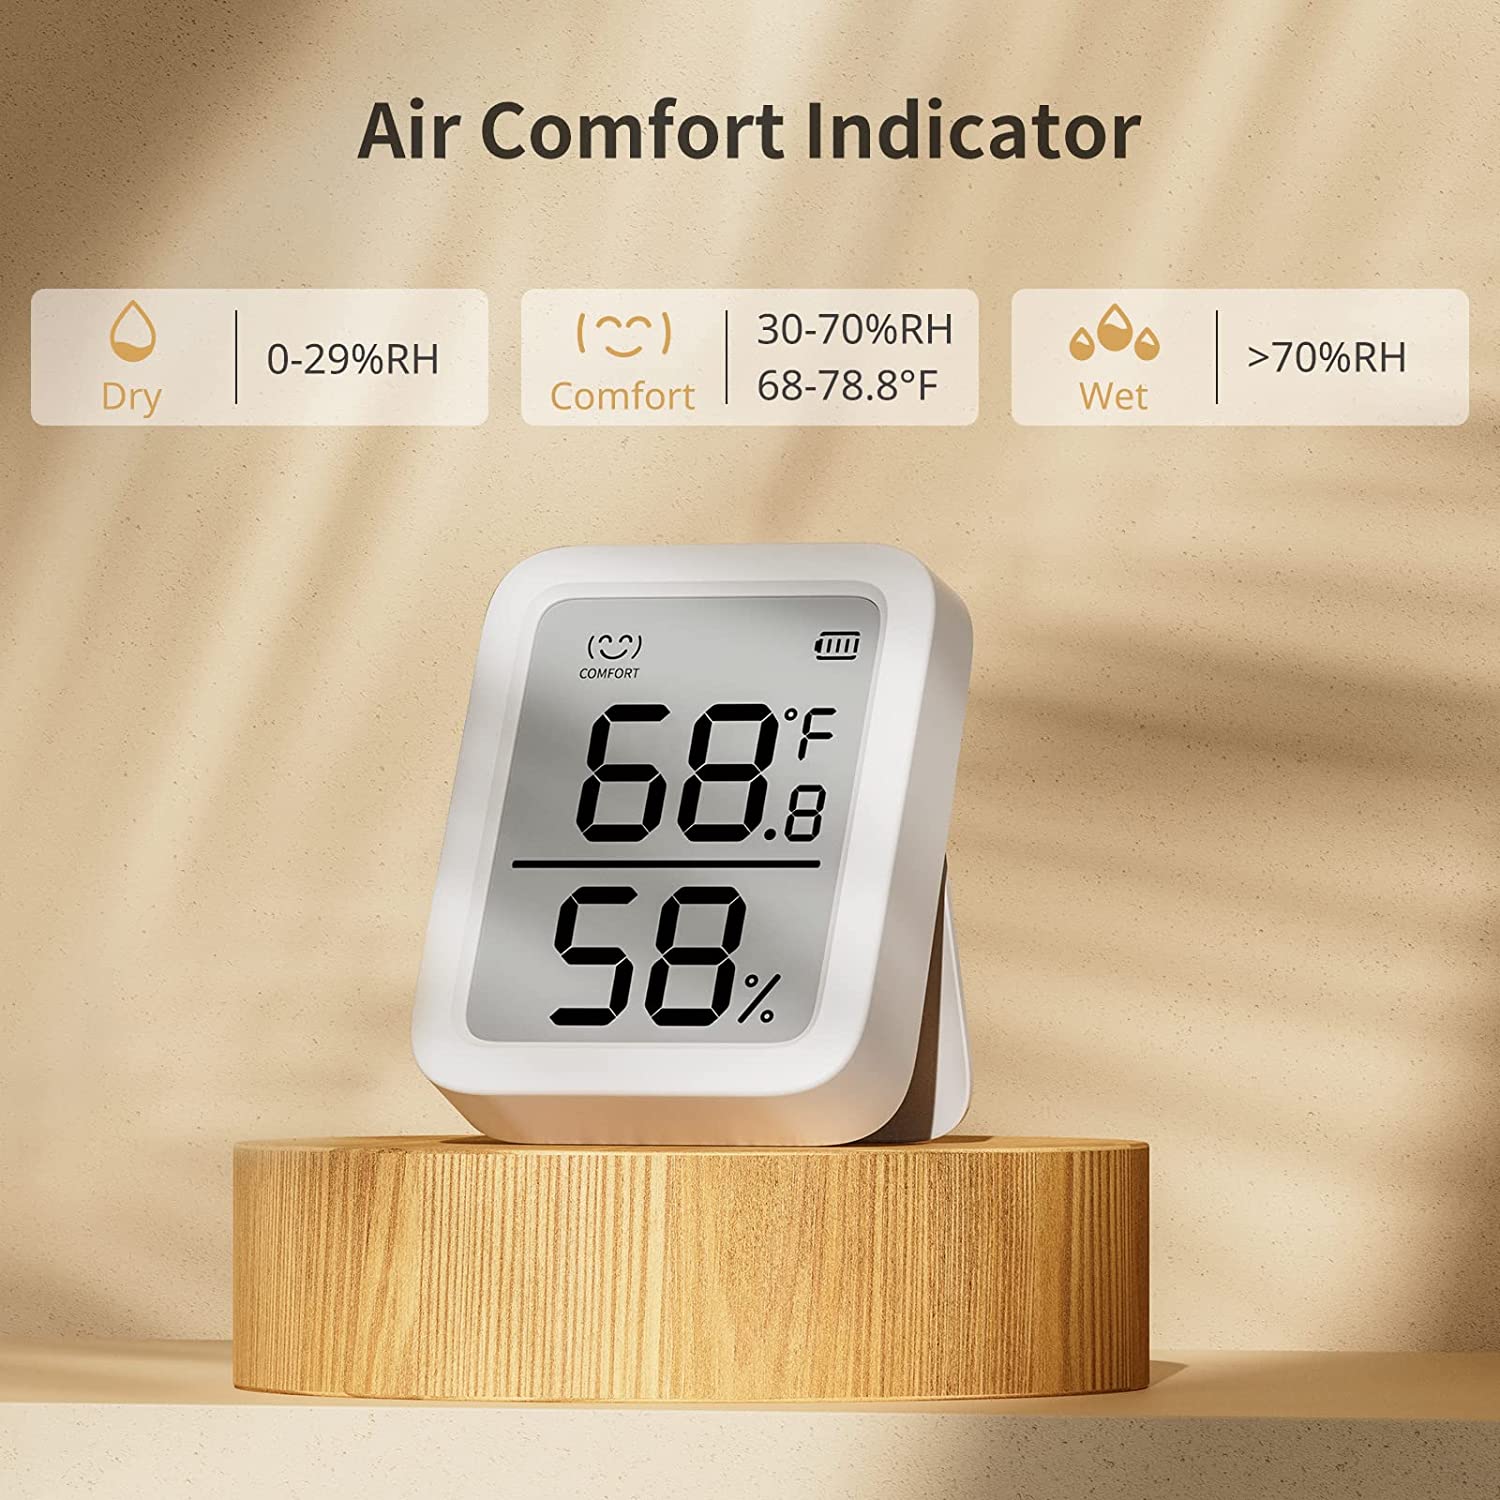 SwitchBot Thermometer & Hygrometer Plus | Bluetooth Indoor Humidity Meter and Temperature Sensor with App Control, Notification Alerts, Remote Monitor for Home